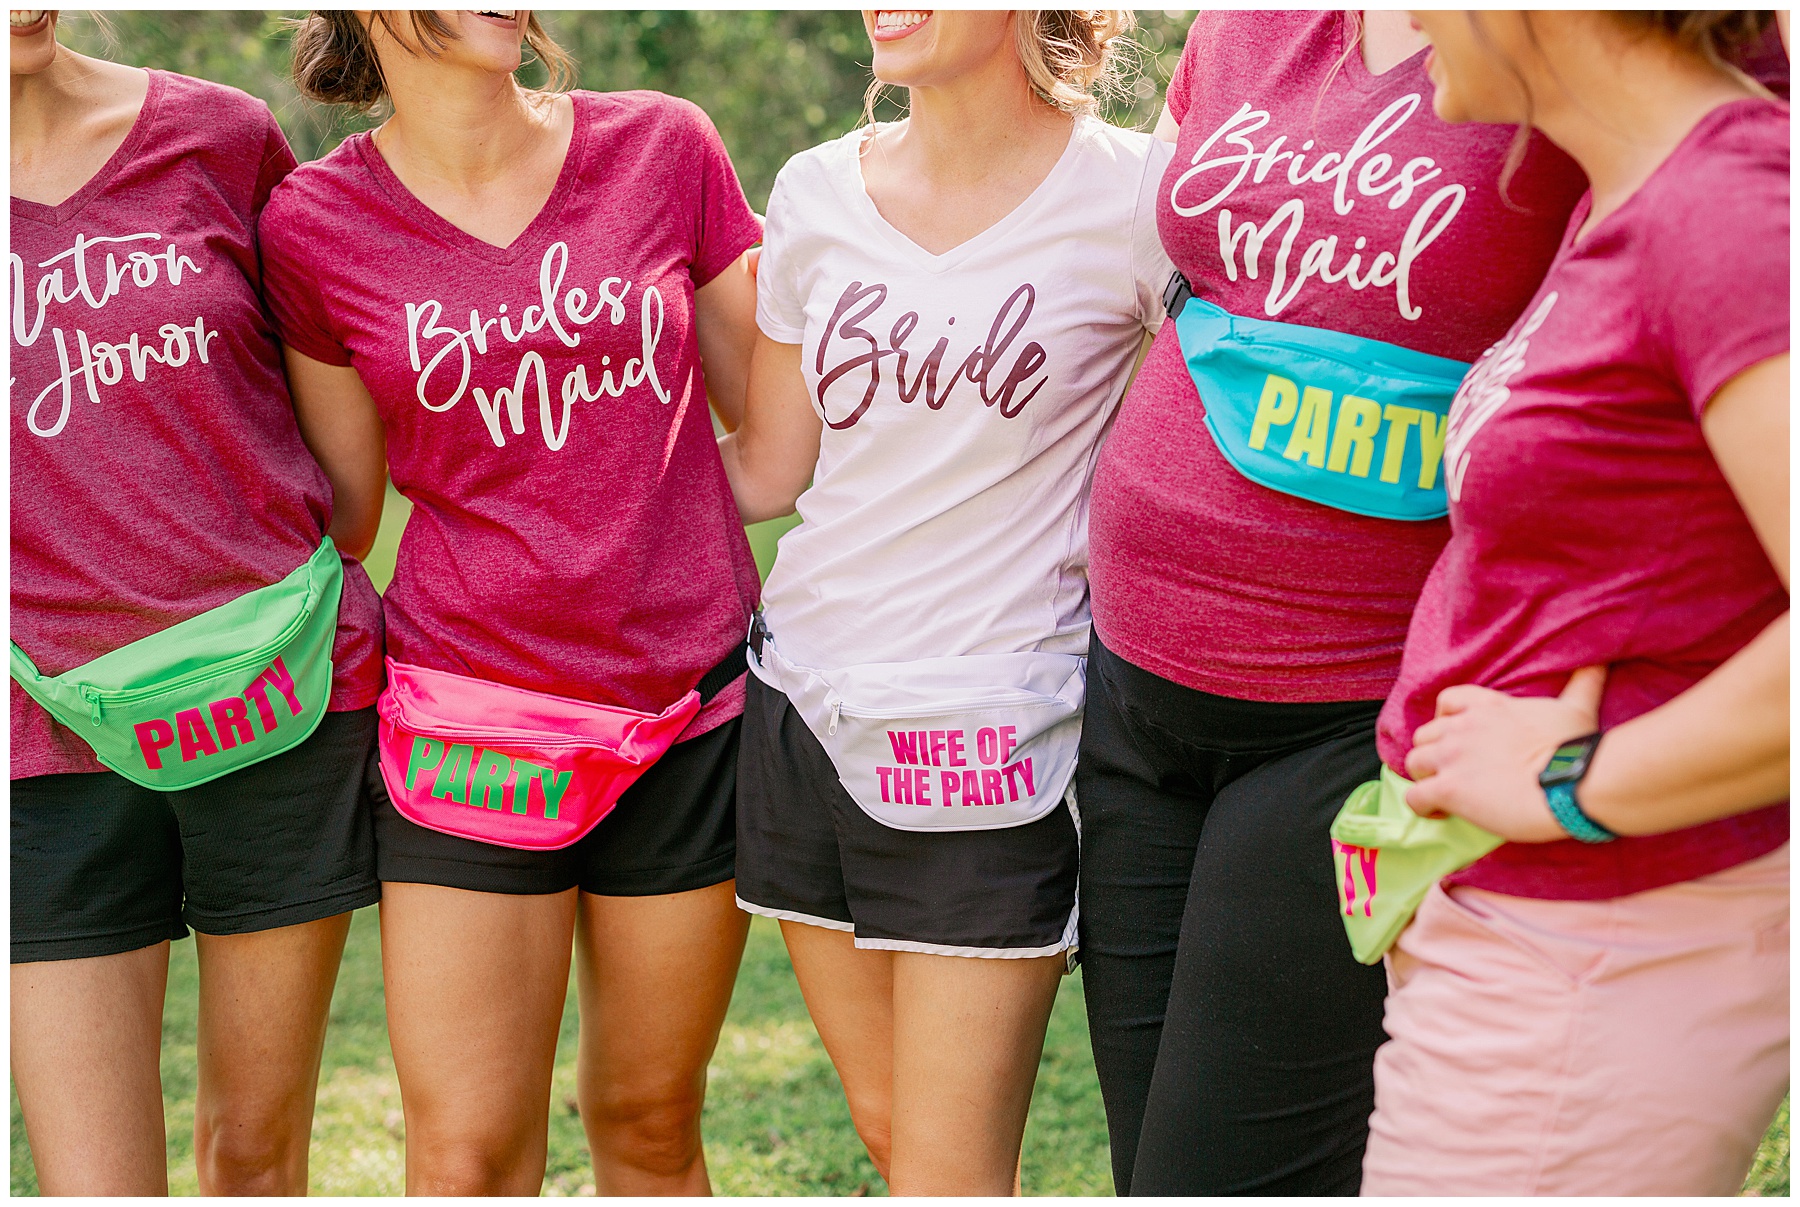 detail photo of bridesmaid gifts ideas including matching tshirts and fanny packs